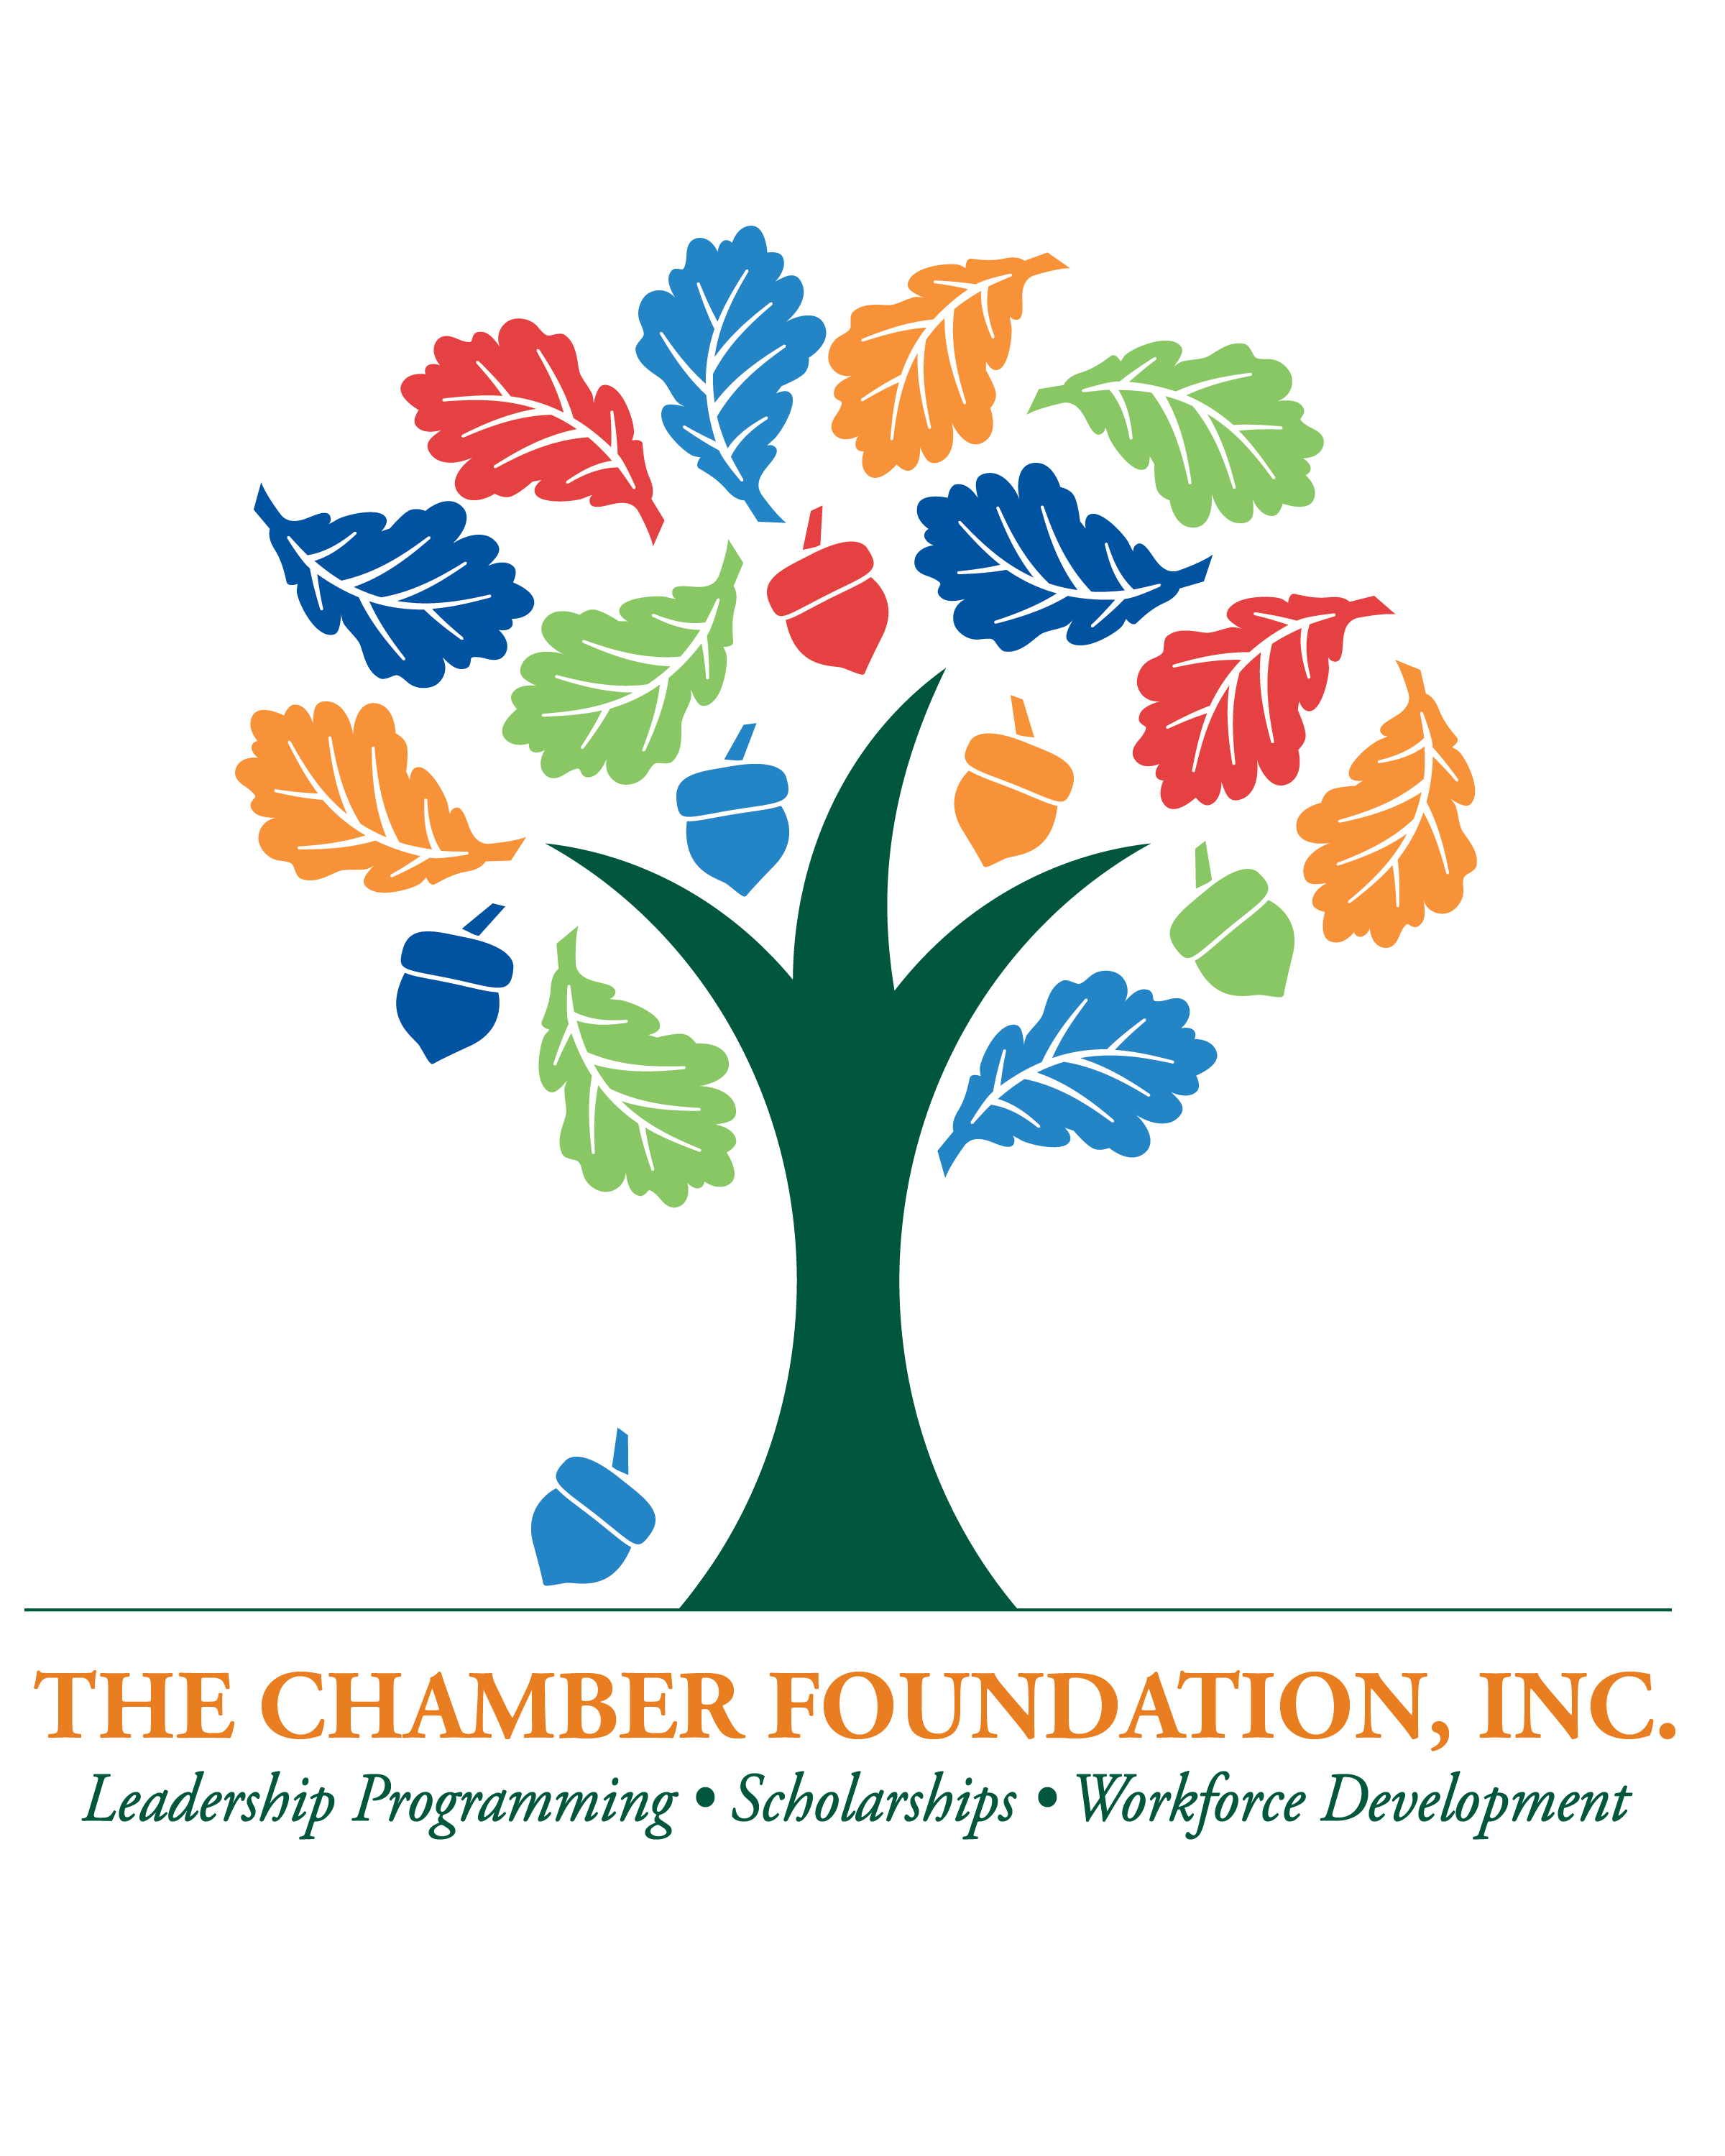 Ways to Volunteer at The Chamber Foundation for 2022